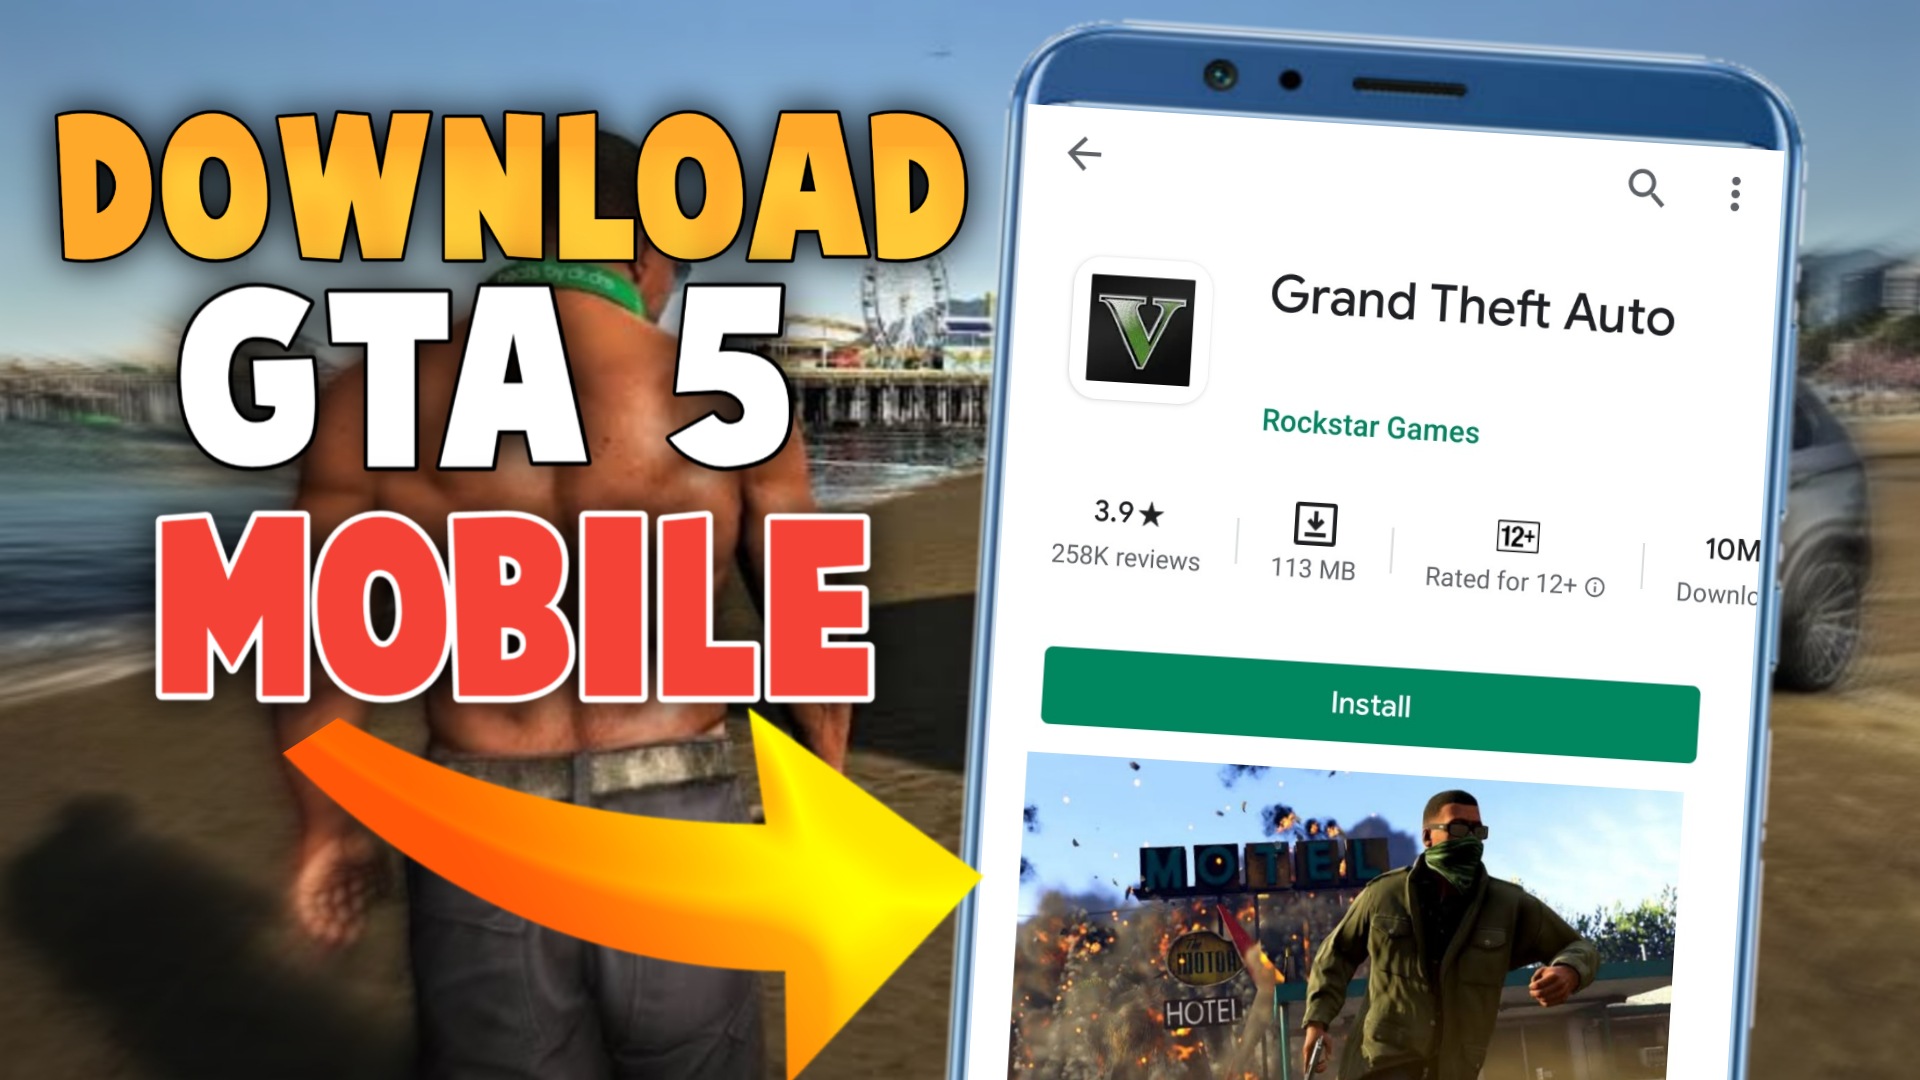 Stream GTA 5 Mobile APK: How to Download and Install on Android (100%  Working) by NistterZiqgi